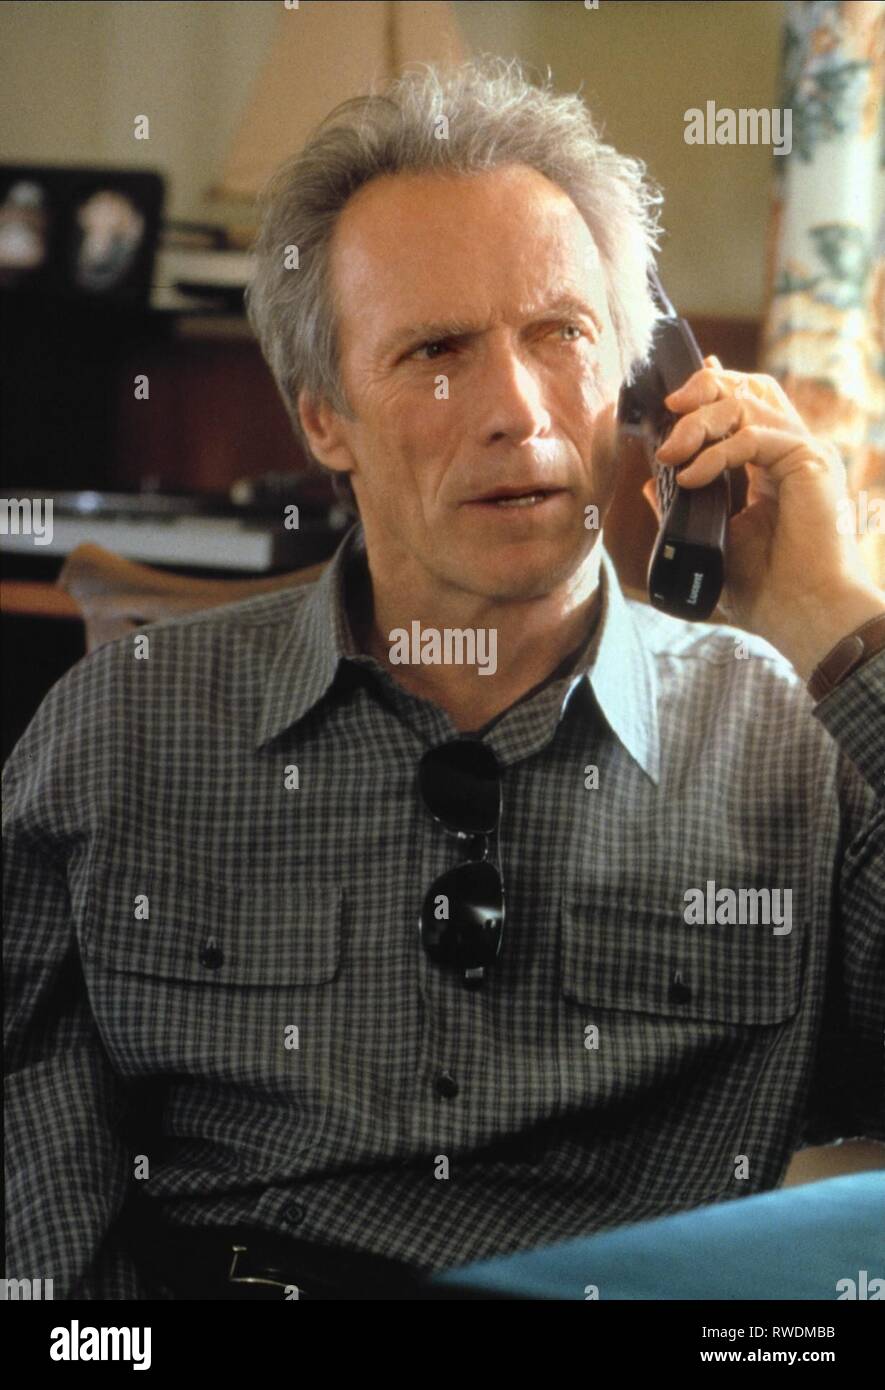 True Crime 1999 Clint Eastwood High Resolution Stock Photography and ...